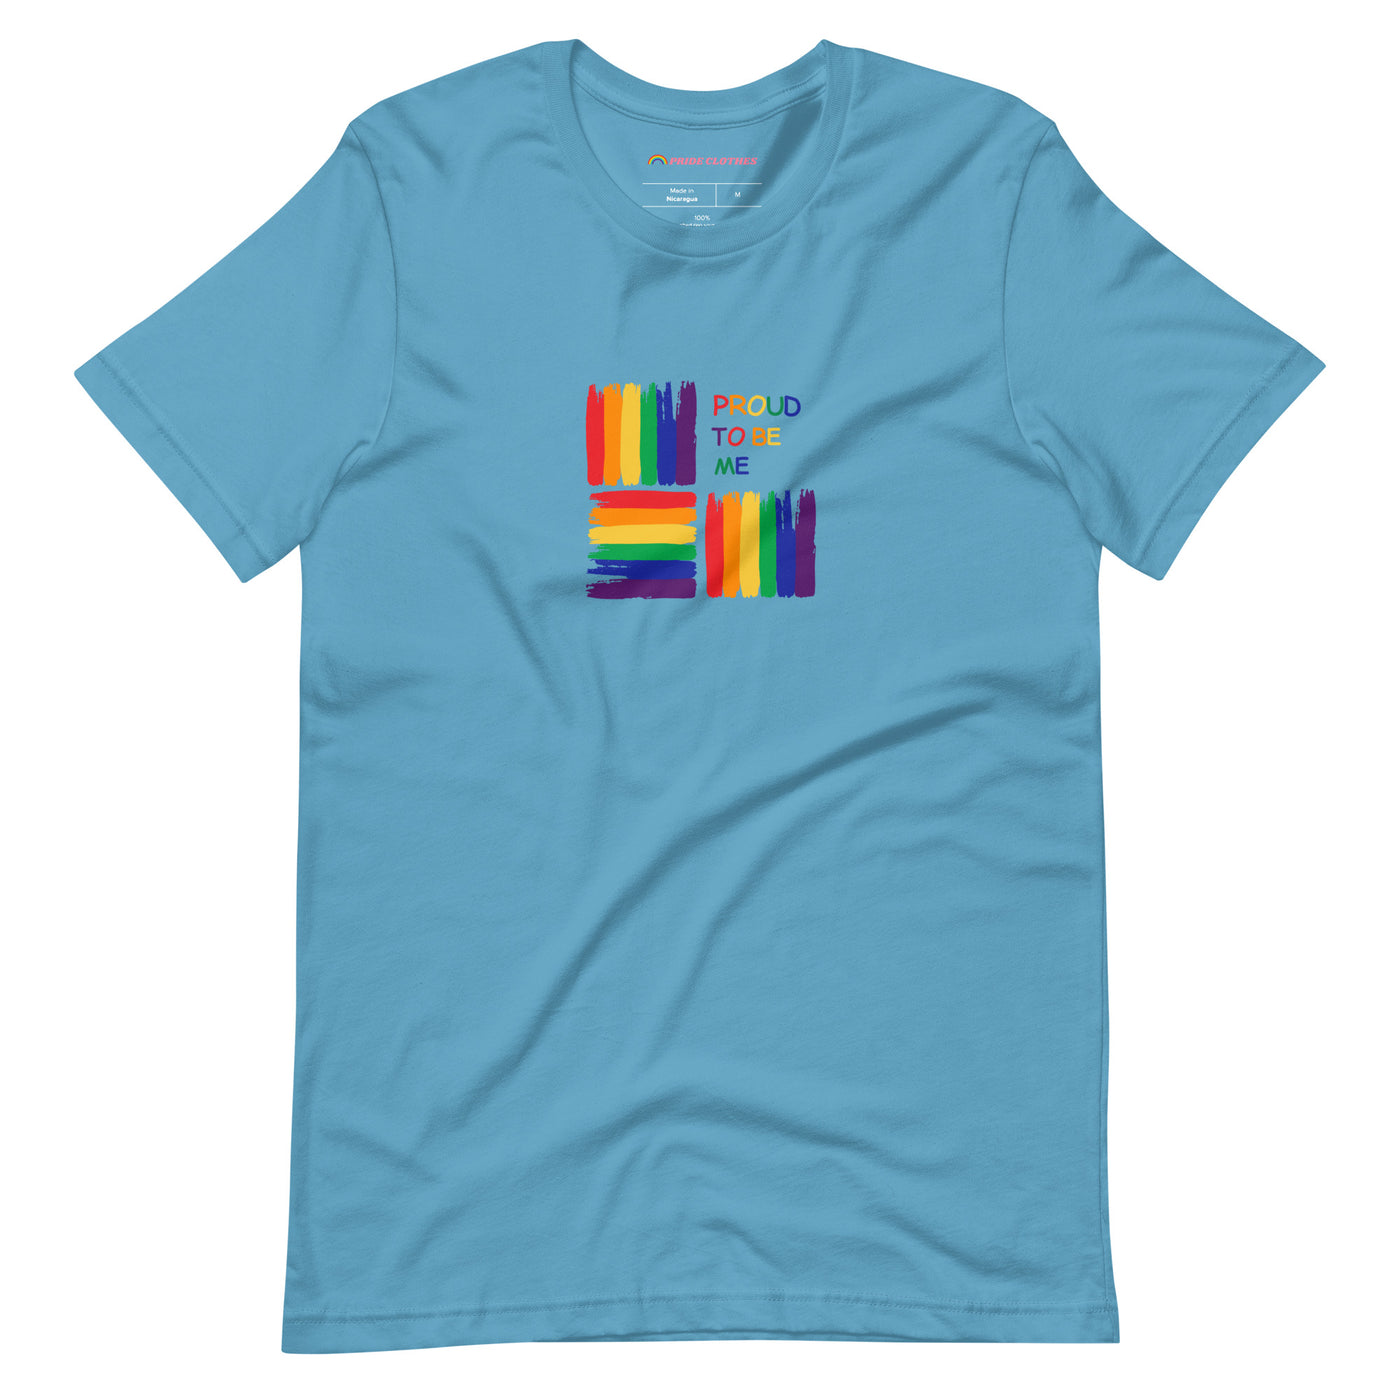 Pride Clothes - Around the Block Proud to Be Me Rainbow Pride T-Shirt - Ocean Blue